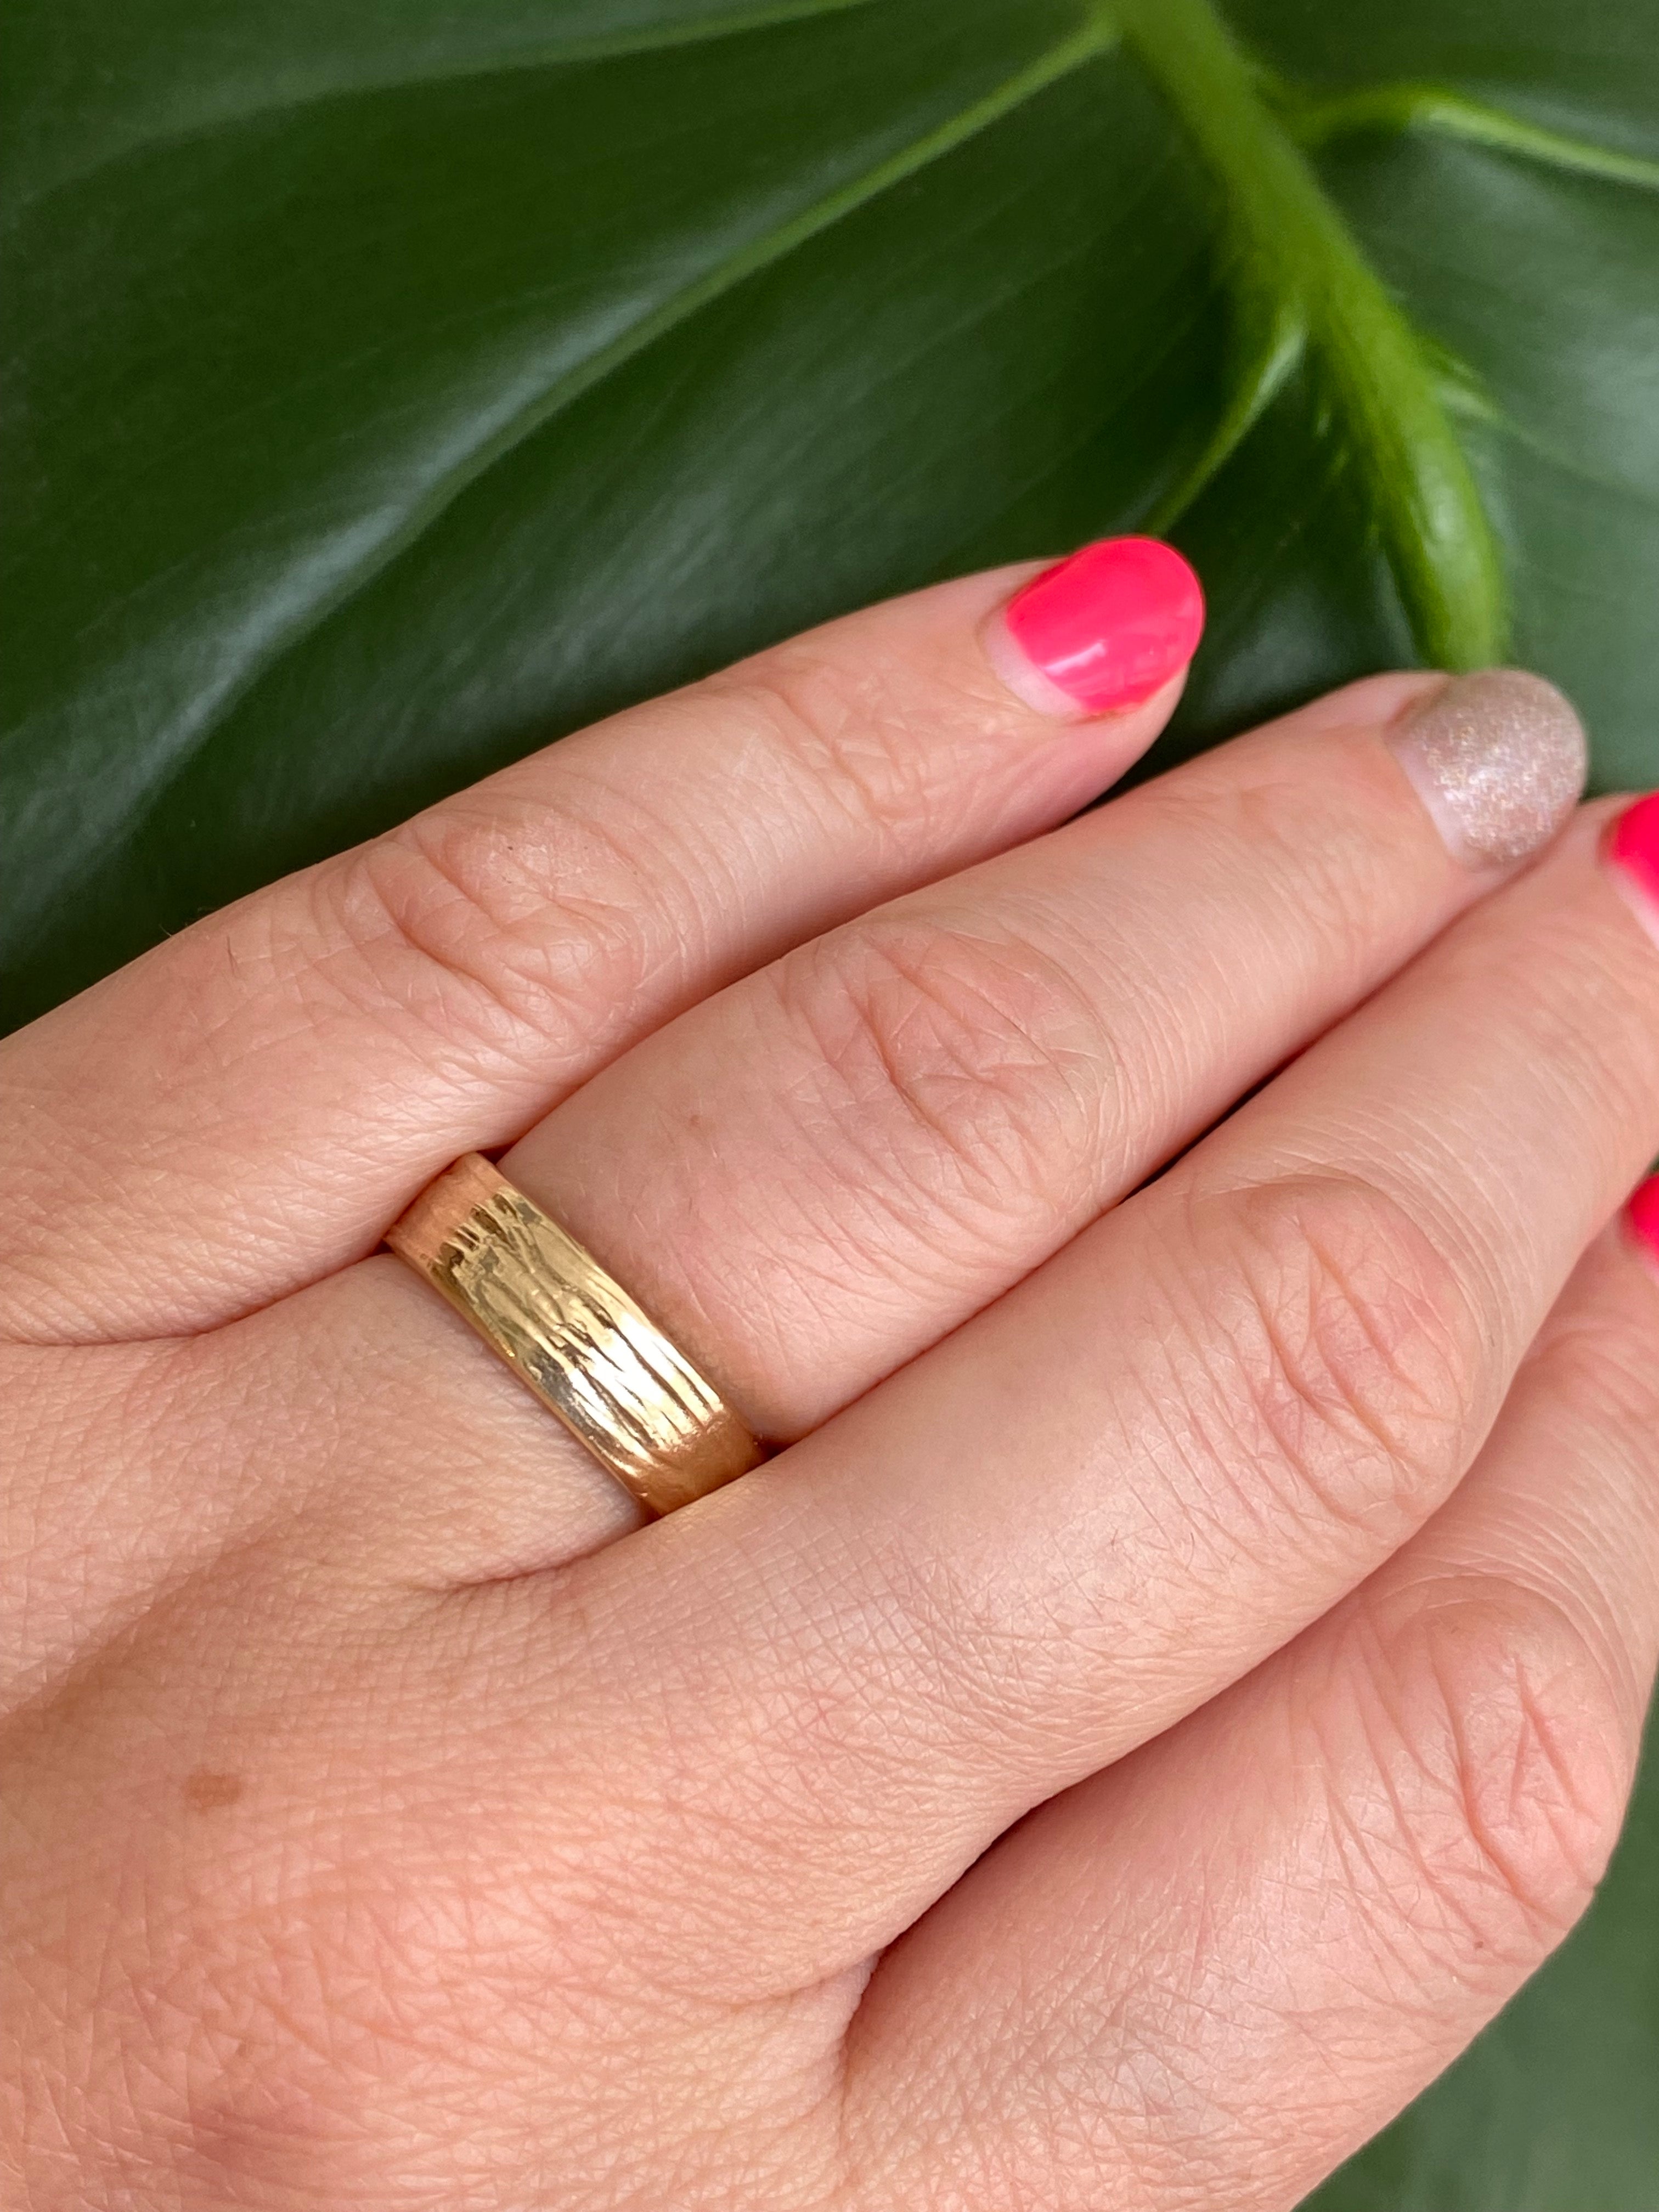 Elle Naz- Organic Linear Wide Band Ring